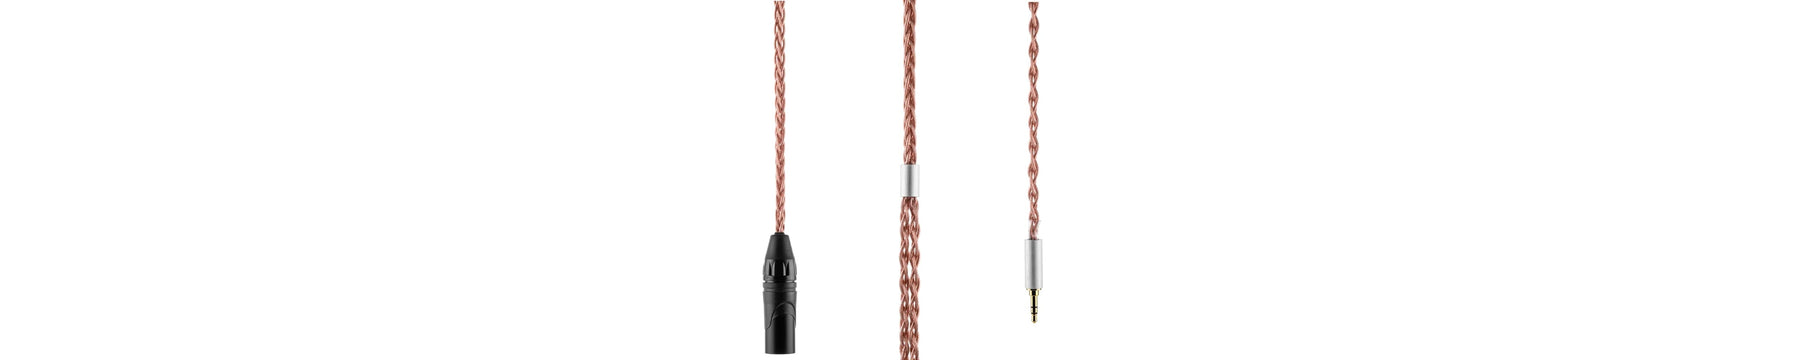 Moondrop Up: High-Purity 1064 Core 6N Single-Crystal Copper Headphone Upgrade Cable